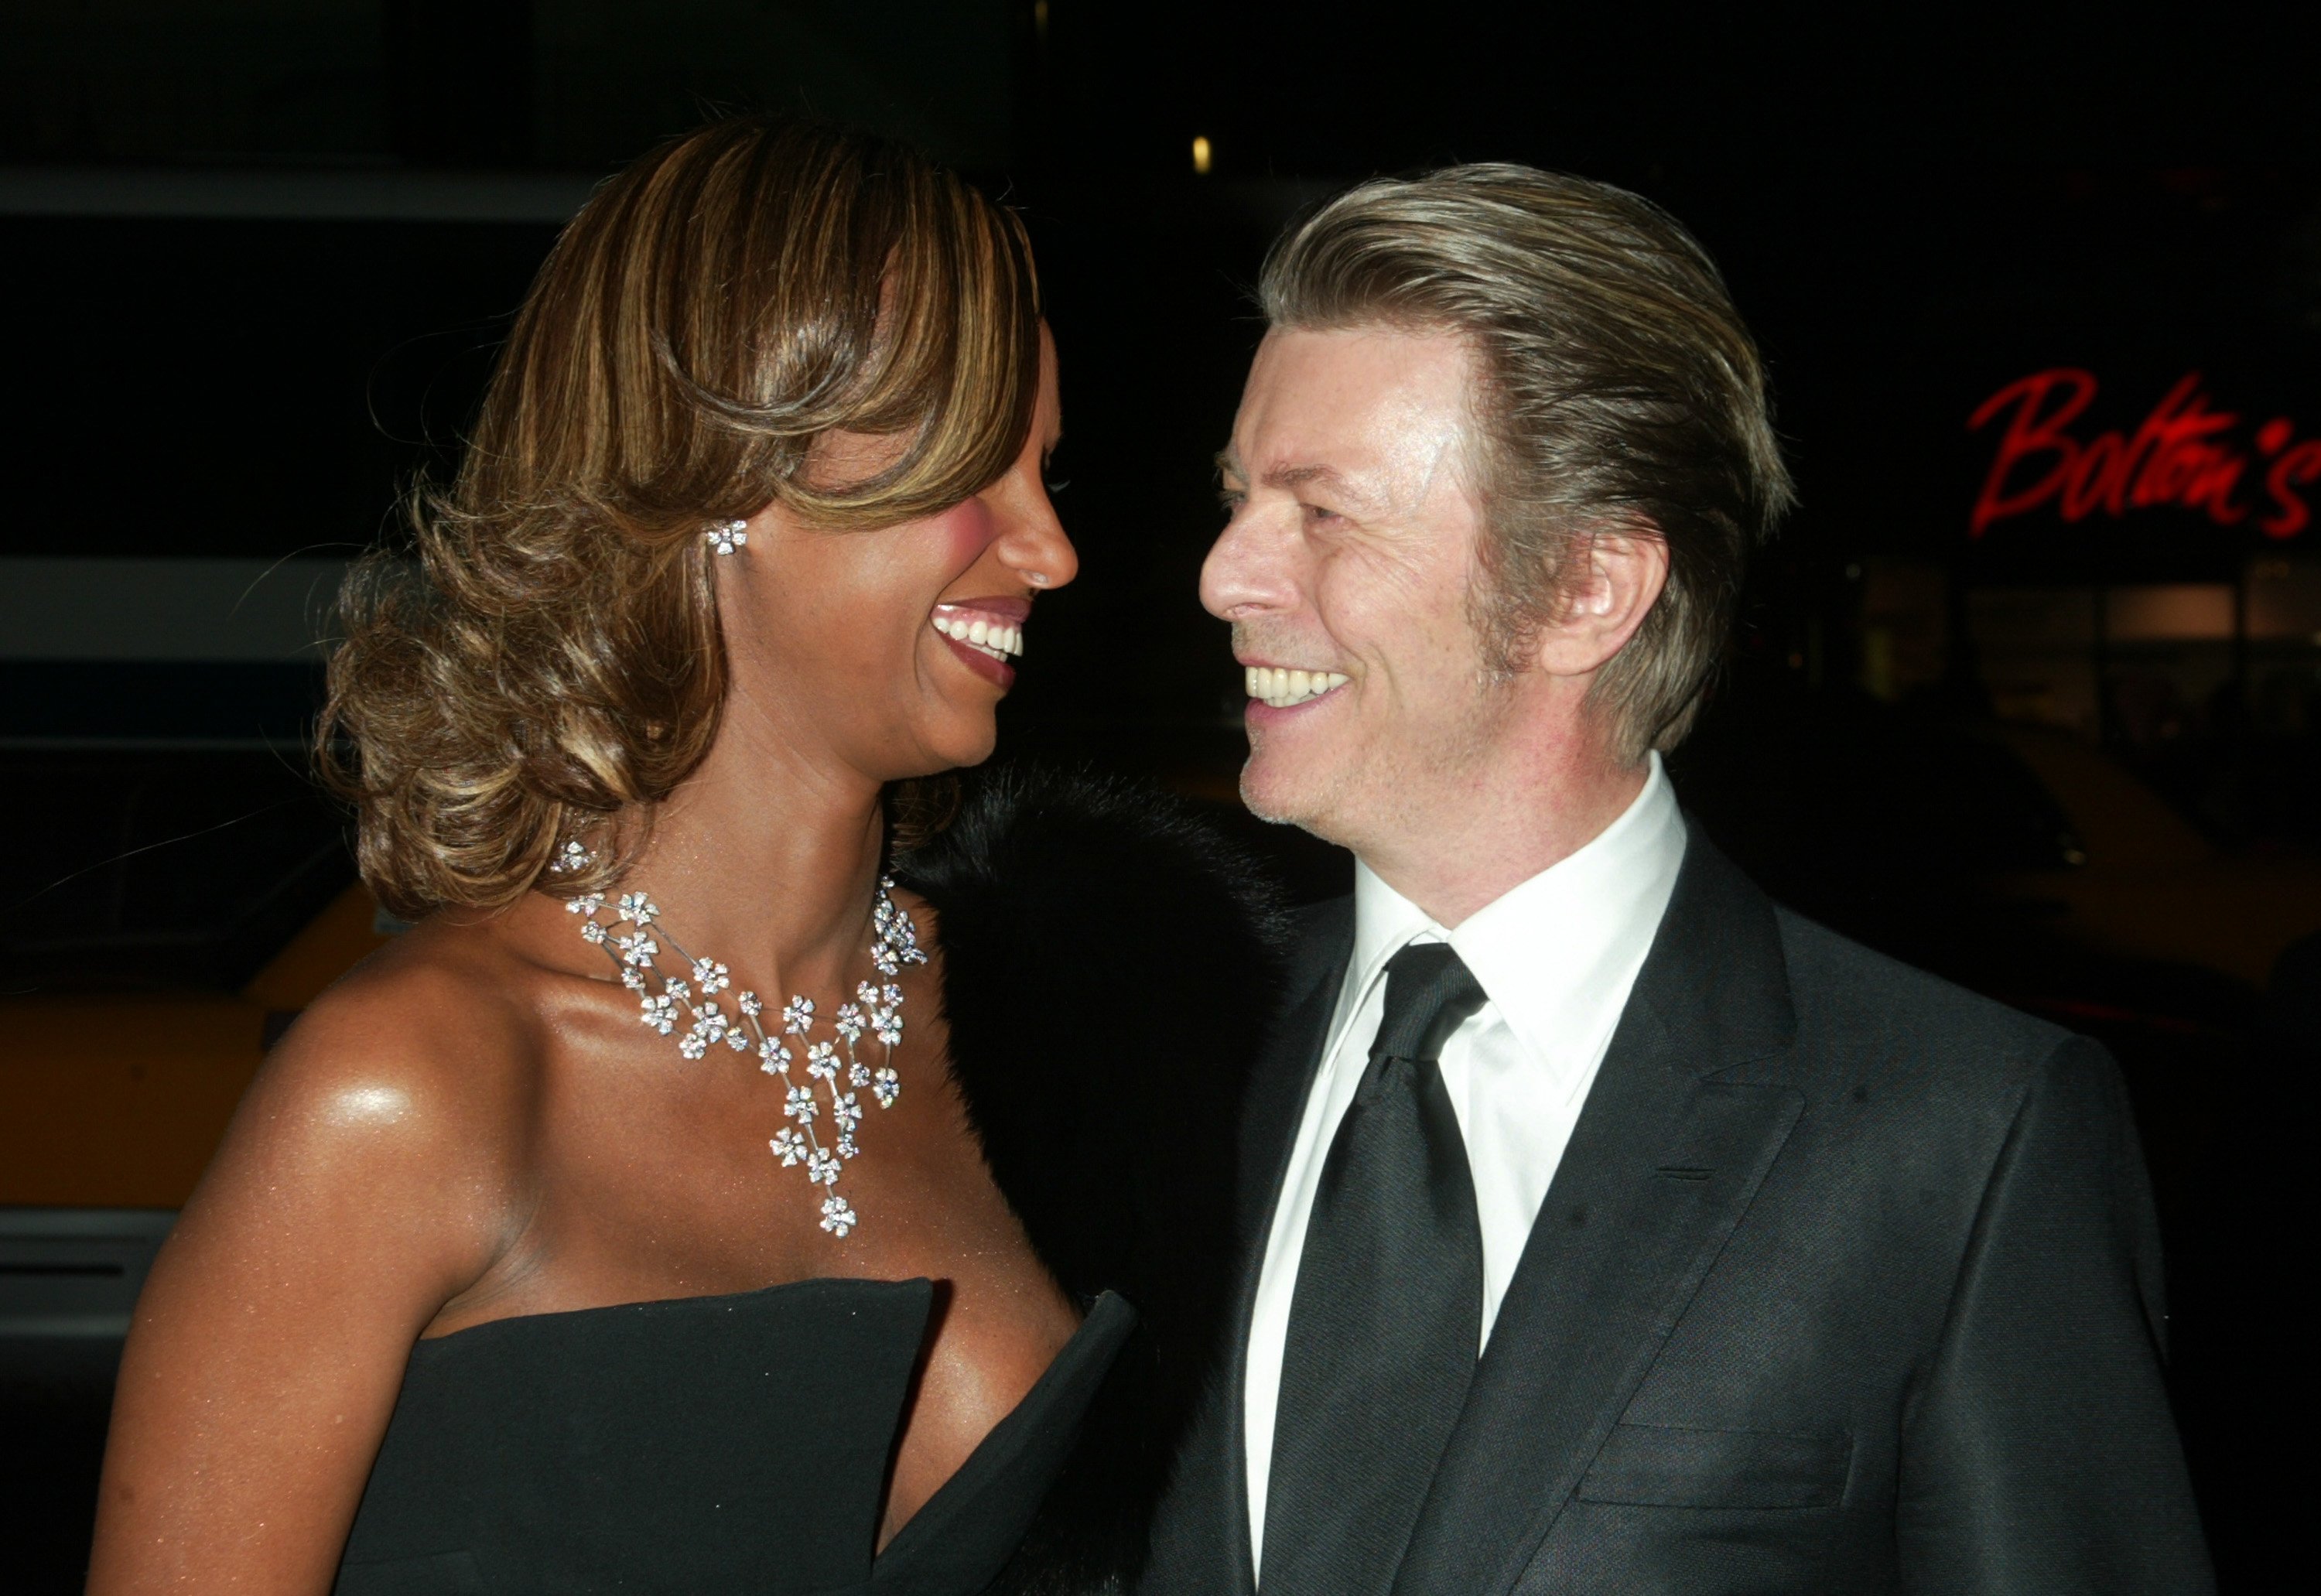 Iman and David Bowie smiling at each other